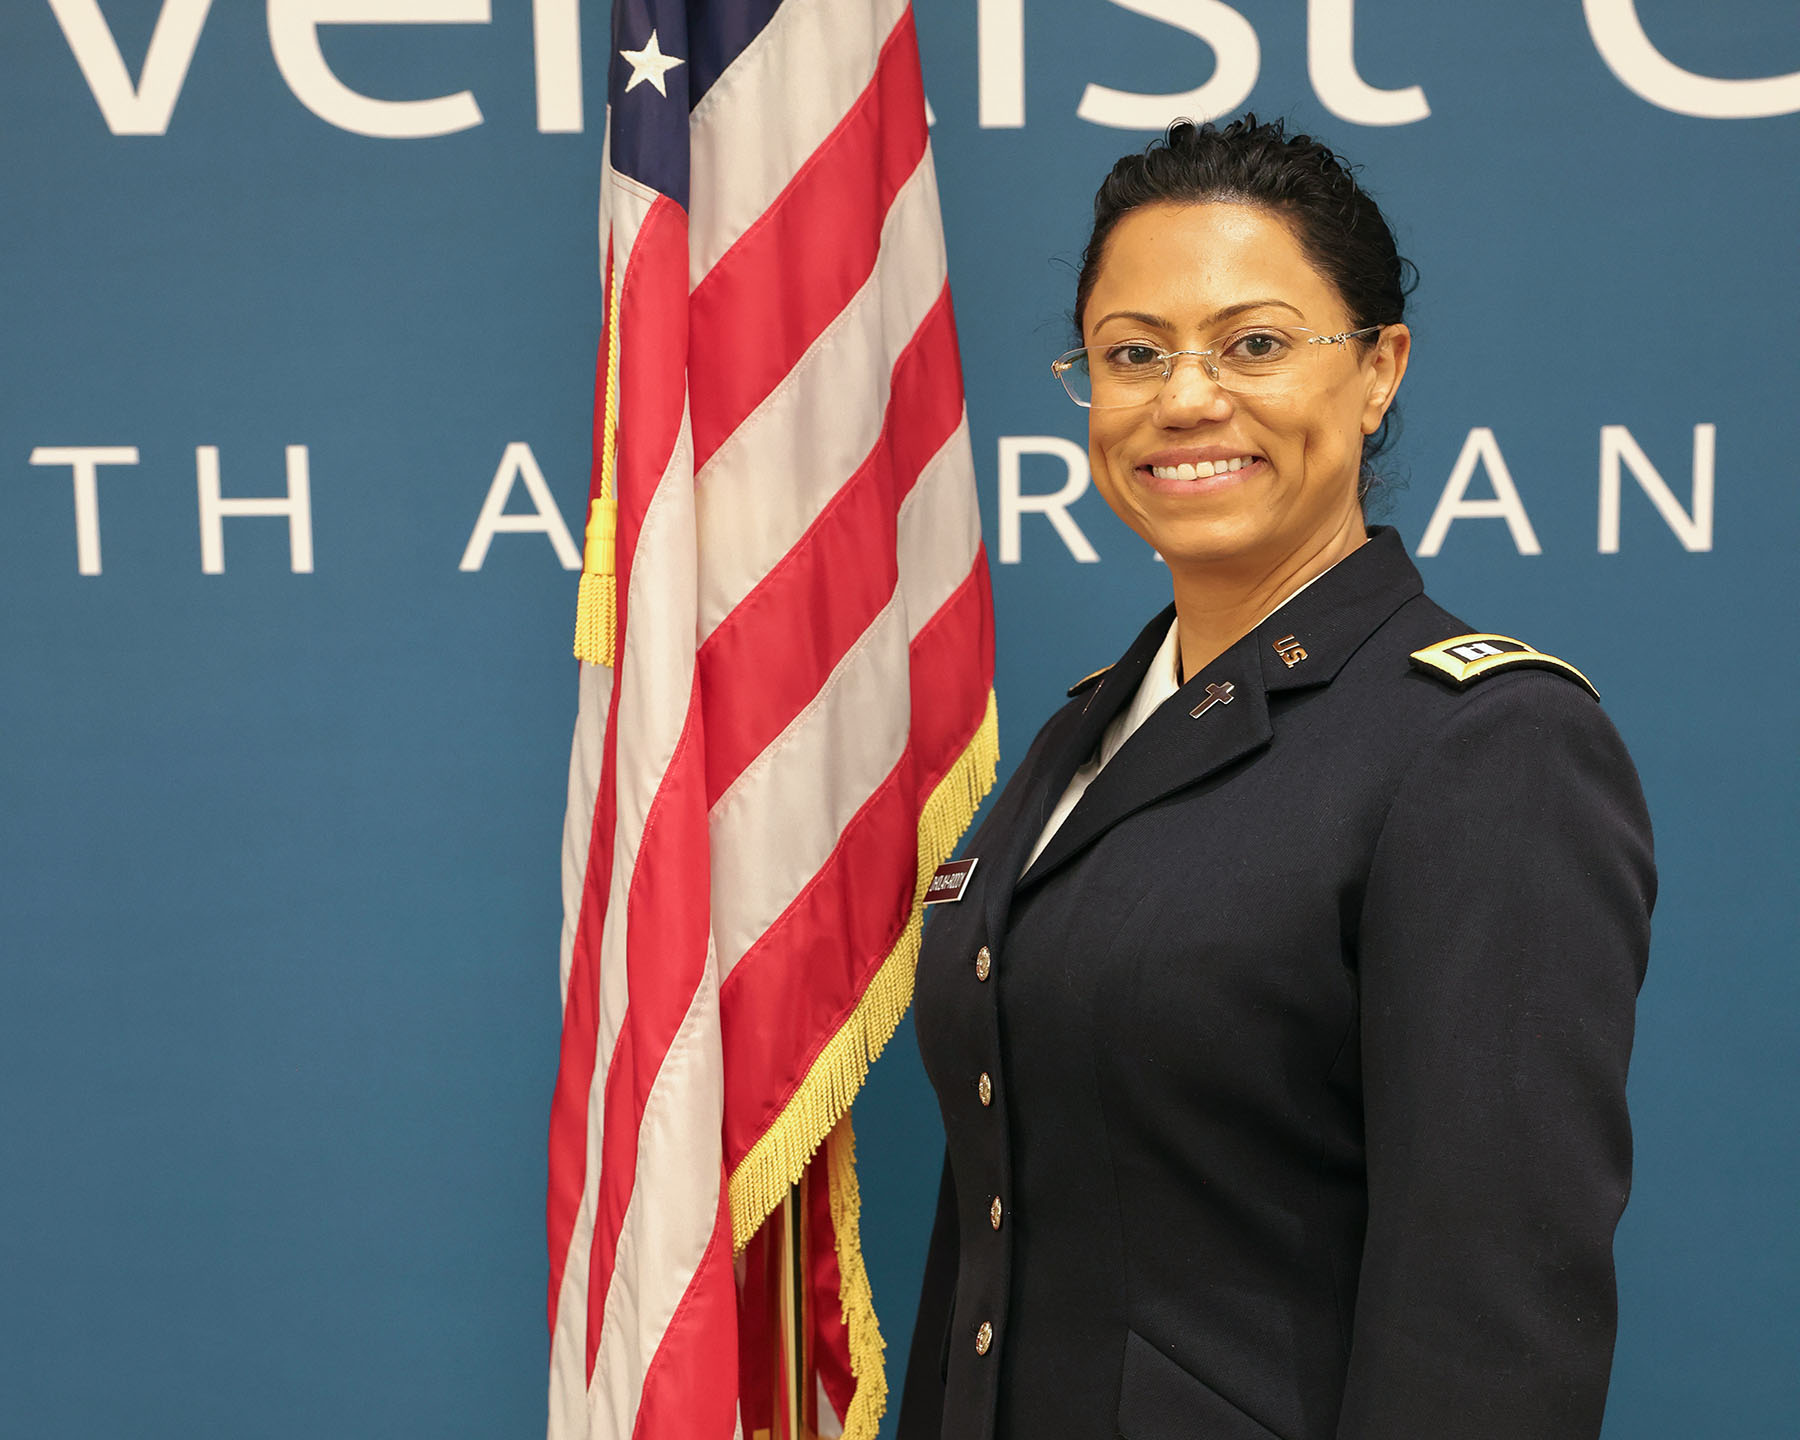 Woman in uniform smiling next to American flag.